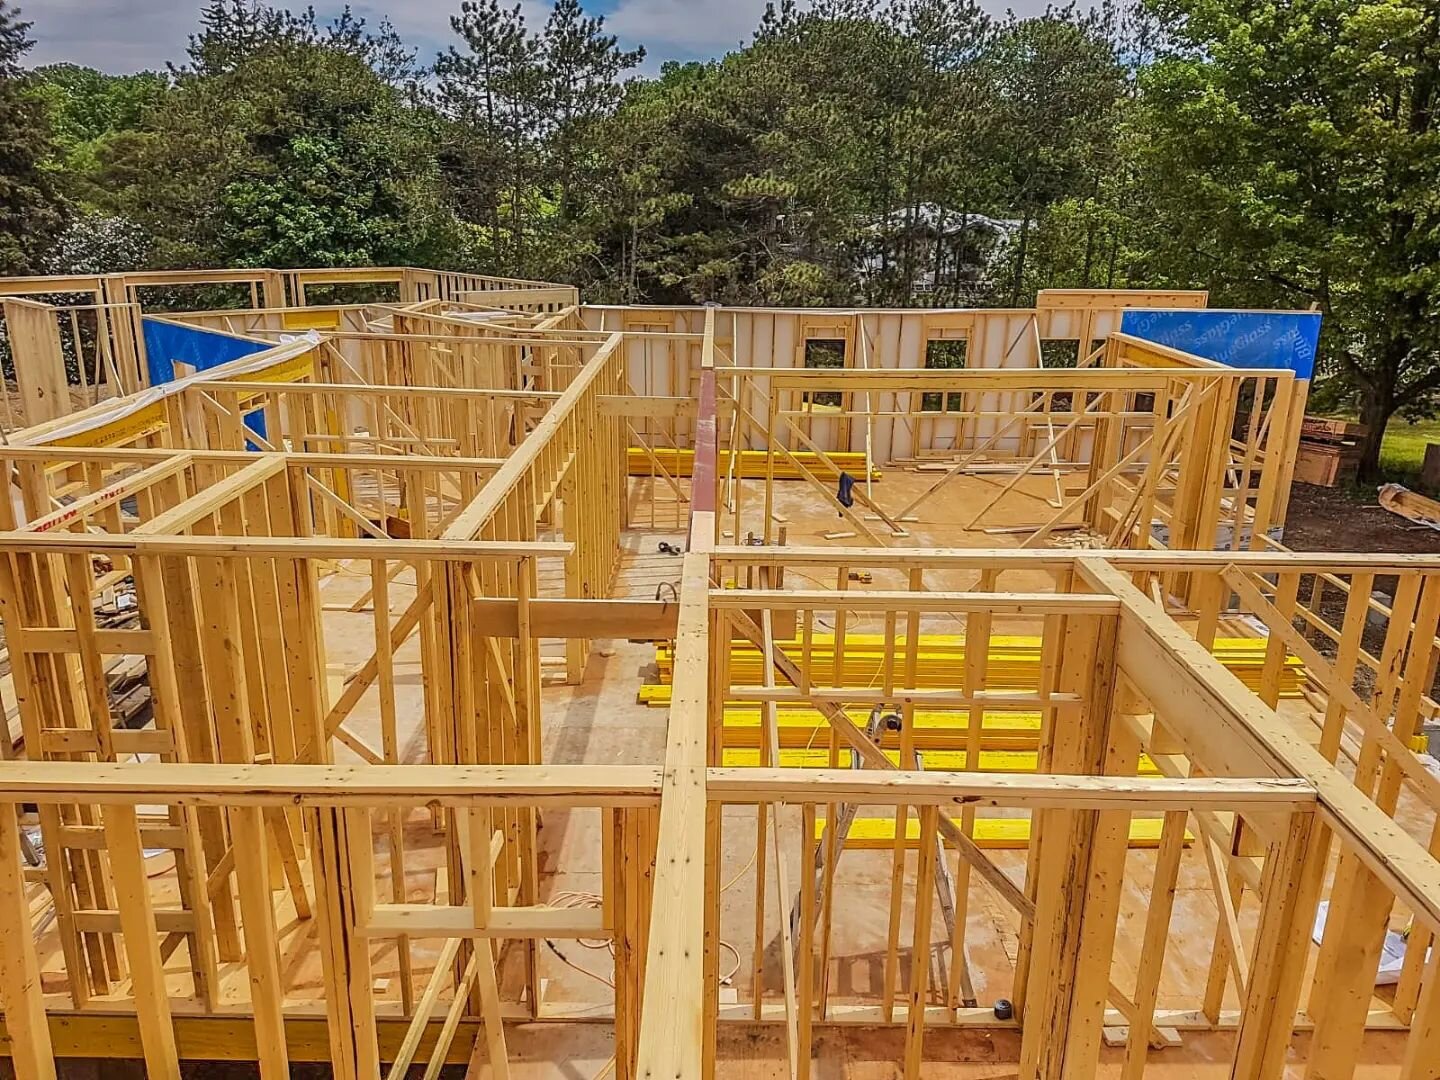 Ready for that warm weather to come &amp; stay! Time to deliver more builds like this project last summer! 🛠

#framing #construction #durhamregion #carpentry #customhomebuilder